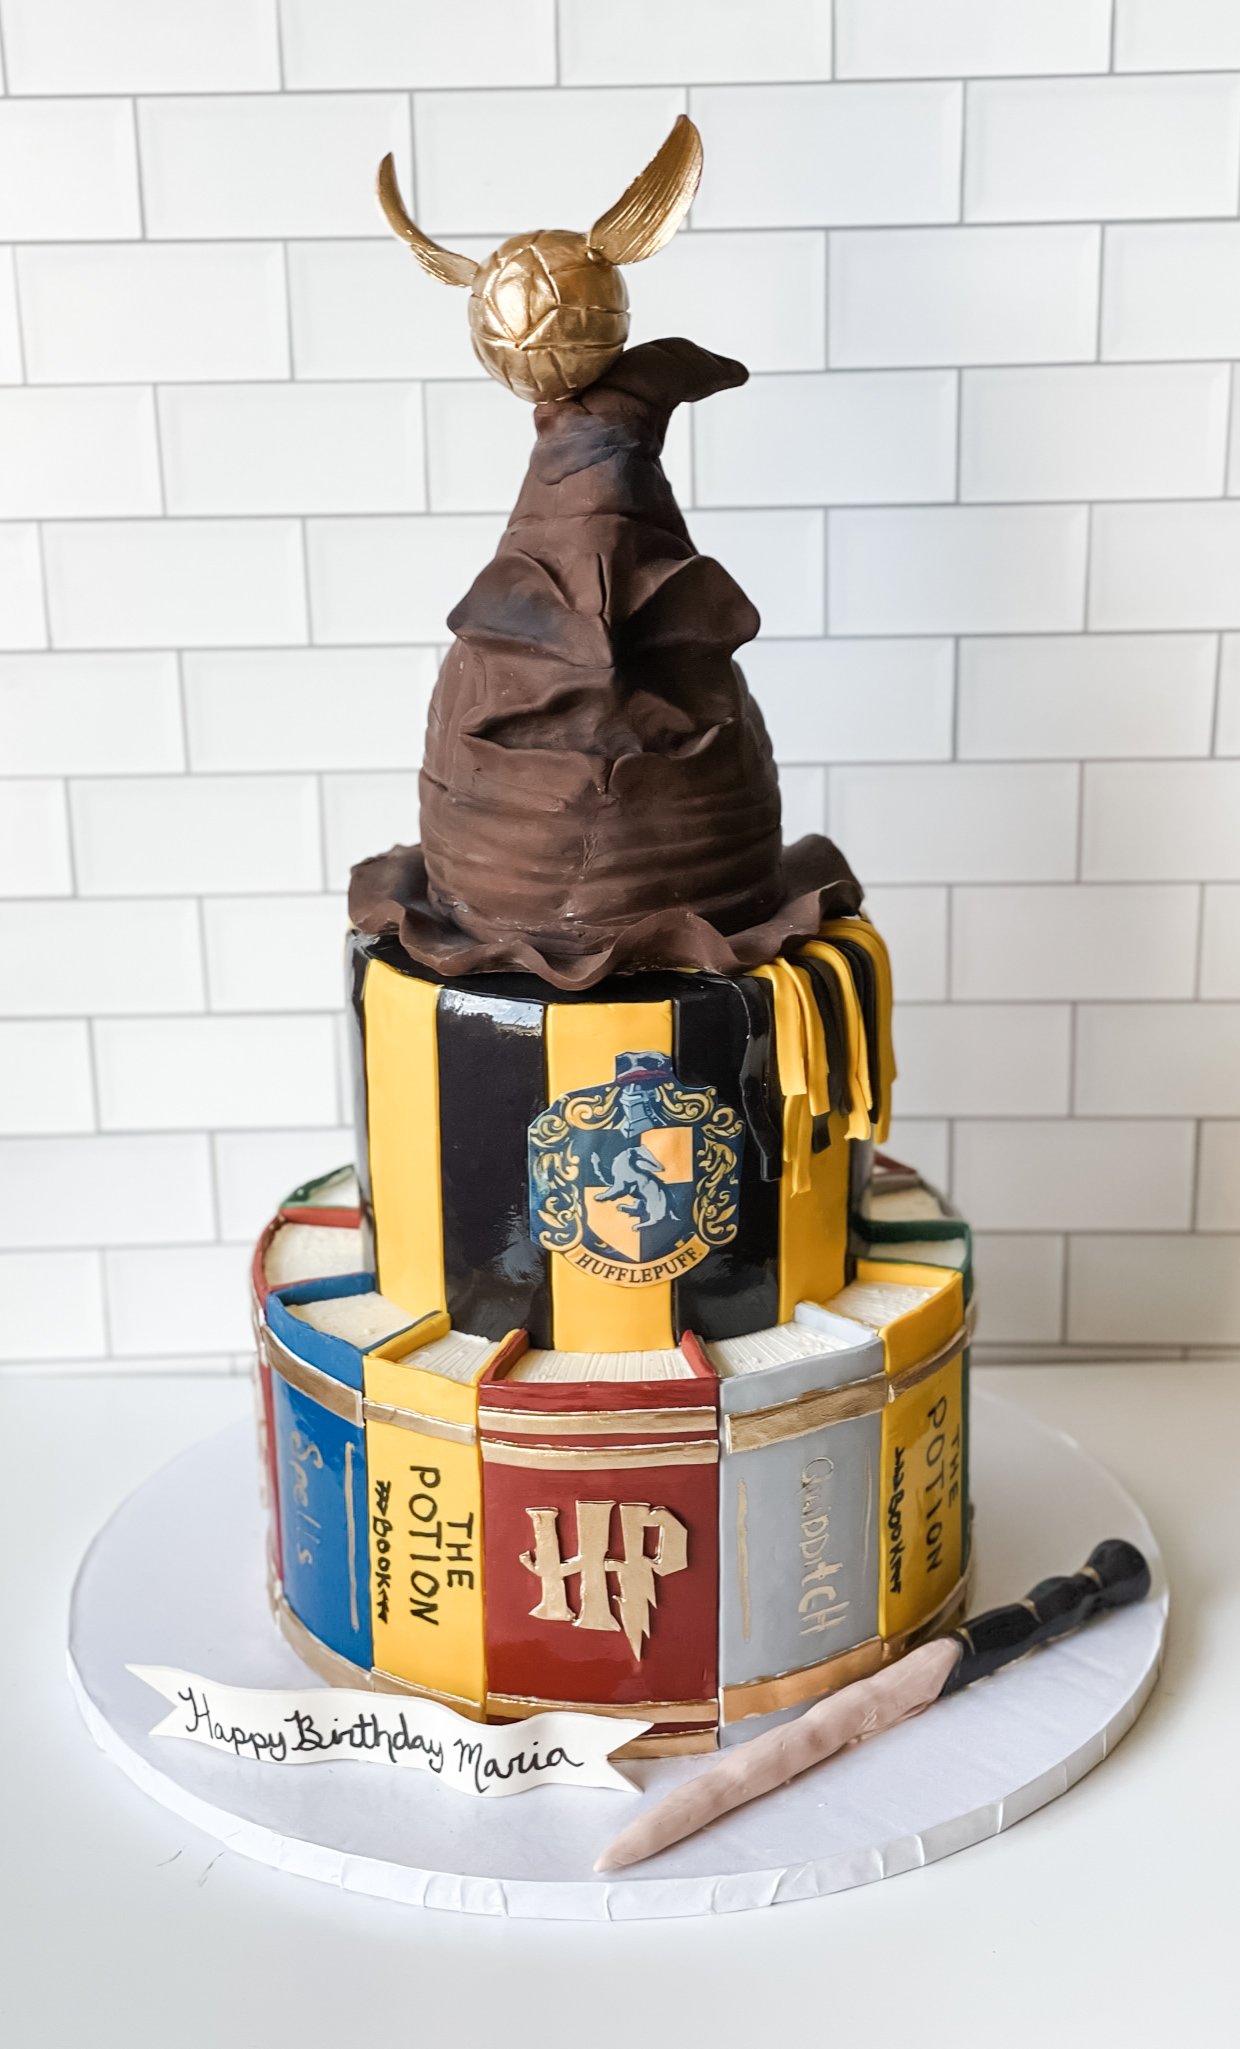 Sugar'n'balmy - Piñata cake!! Harry potter theme Signature belgian  Chocolate Cake ❤❤ . Every moment is special!! Celebrate it with  Sugar'n'Balmy !! Order on 9872088006 . #piñatacake #harrypottercake  #chocolatecake #belgianchocolate #strawberrycake